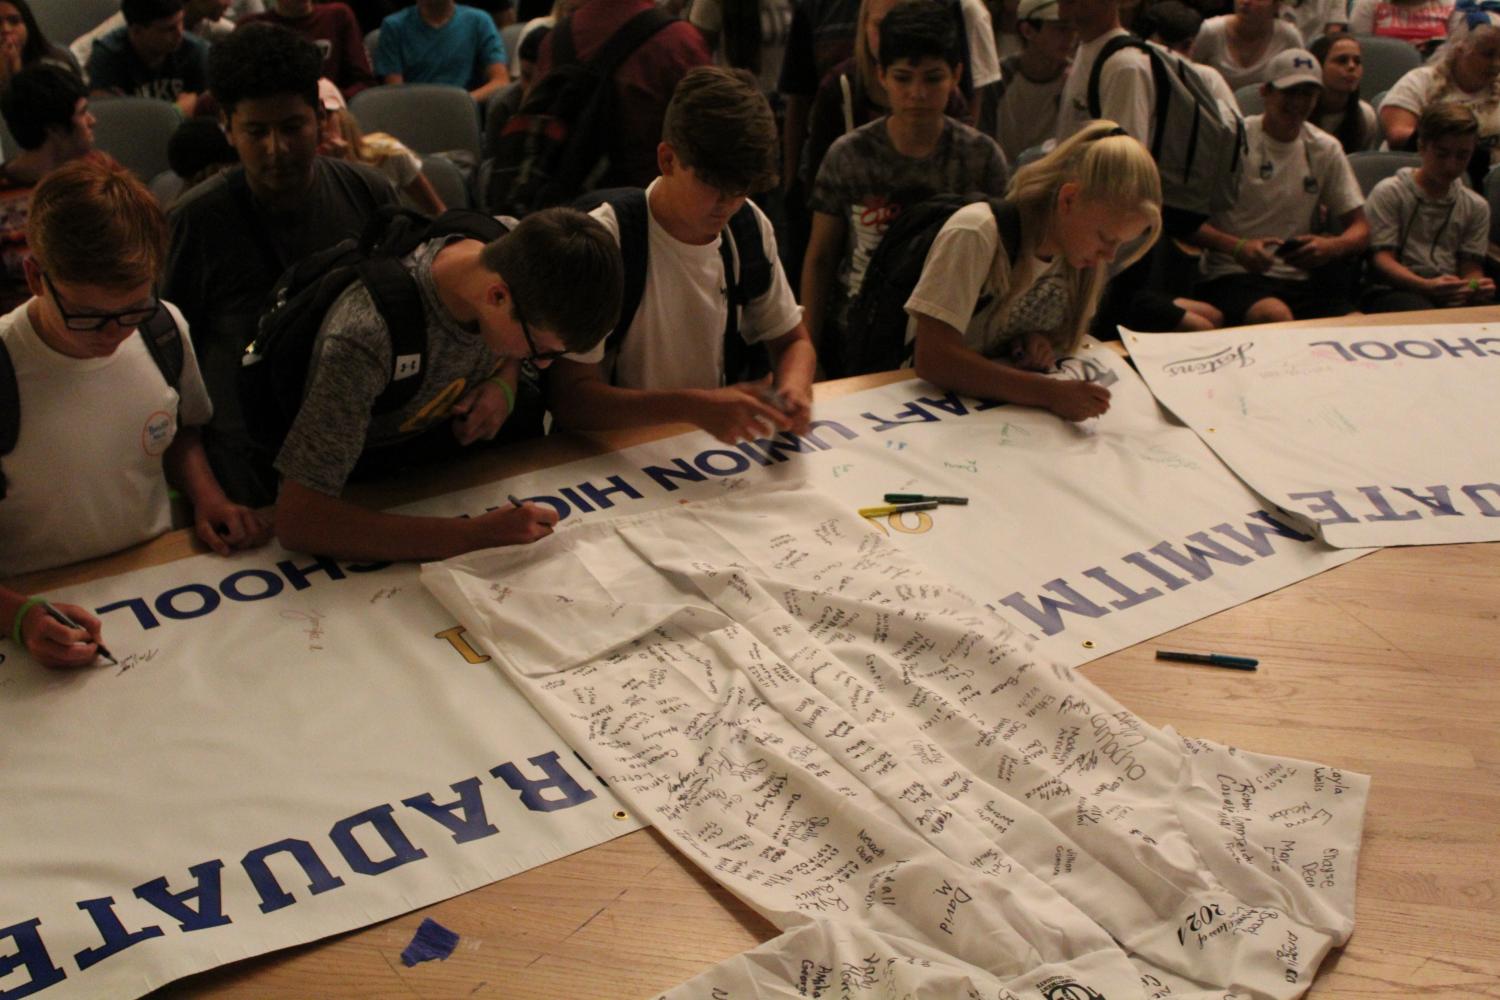 Students sign gown representing their commitment to graduation